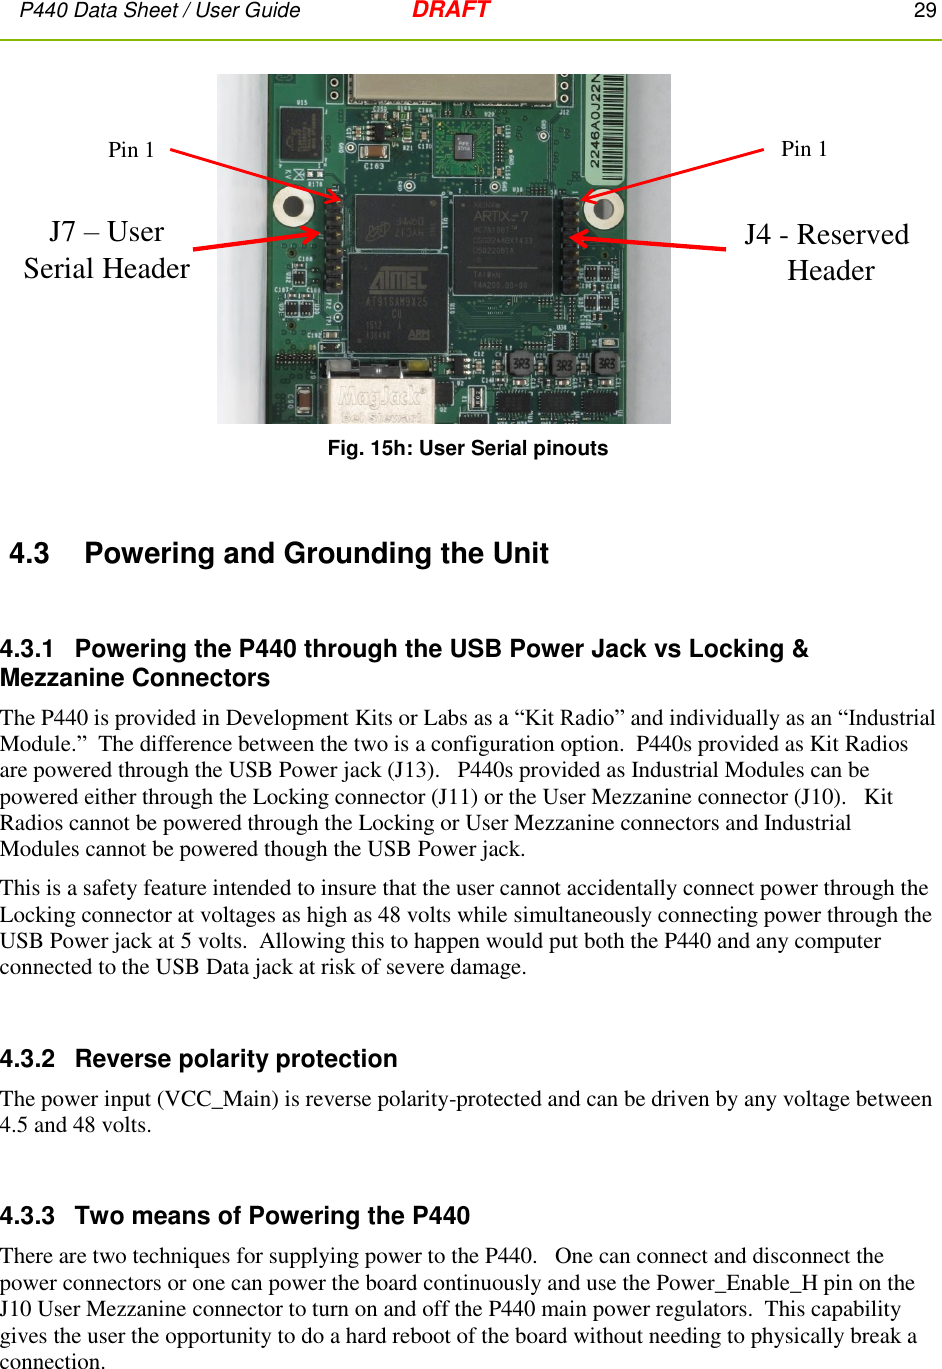 P440 Data Sheet / User Guide   DRAFT    29          Fig. 15h: User Serial pinouts  4.3  Powering and Grounding the Unit  4.3.1   Powering the P440 through the USB Power Jack vs Locking &amp; Mezzanine Connectors The P440 is provided in Development Kits or Labs as a “Kit Radio” and individually as an “Industrial Module.”  The difference between the two is a configuration option.  P440s provided as Kit Radios are powered through the USB Power jack (J13).   P440s provided as Industrial Modules can be powered either through the Locking connector (J11) or the User Mezzanine connector (J10).   Kit Radios cannot be powered through the Locking or User Mezzanine connectors and Industrial Modules cannot be powered though the USB Power jack. This is a safety feature intended to insure that the user cannot accidentally connect power through the Locking connector at voltages as high as 48 volts while simultaneously connecting power through the USB Power jack at 5 volts.  Allowing this to happen would put both the P440 and any computer connected to the USB Data jack at risk of severe damage.  4.3.2  Reverse polarity protection The power input (VCC_Main) is reverse polarity-protected and can be driven by any voltage between 4.5 and 48 volts.  4.3.3  Two means of Powering the P440 There are two techniques for supplying power to the P440.   One can connect and disconnect the power connectors or one can power the board continuously and use the Power_Enable_H pin on the J10 User Mezzanine connector to turn on and off the P440 main power regulators.  This capability gives the user the opportunity to do a hard reboot of the board without needing to physically break a connection.  J7 –User Serial Header J4 - Reserved HeaderPin 1Pin 1